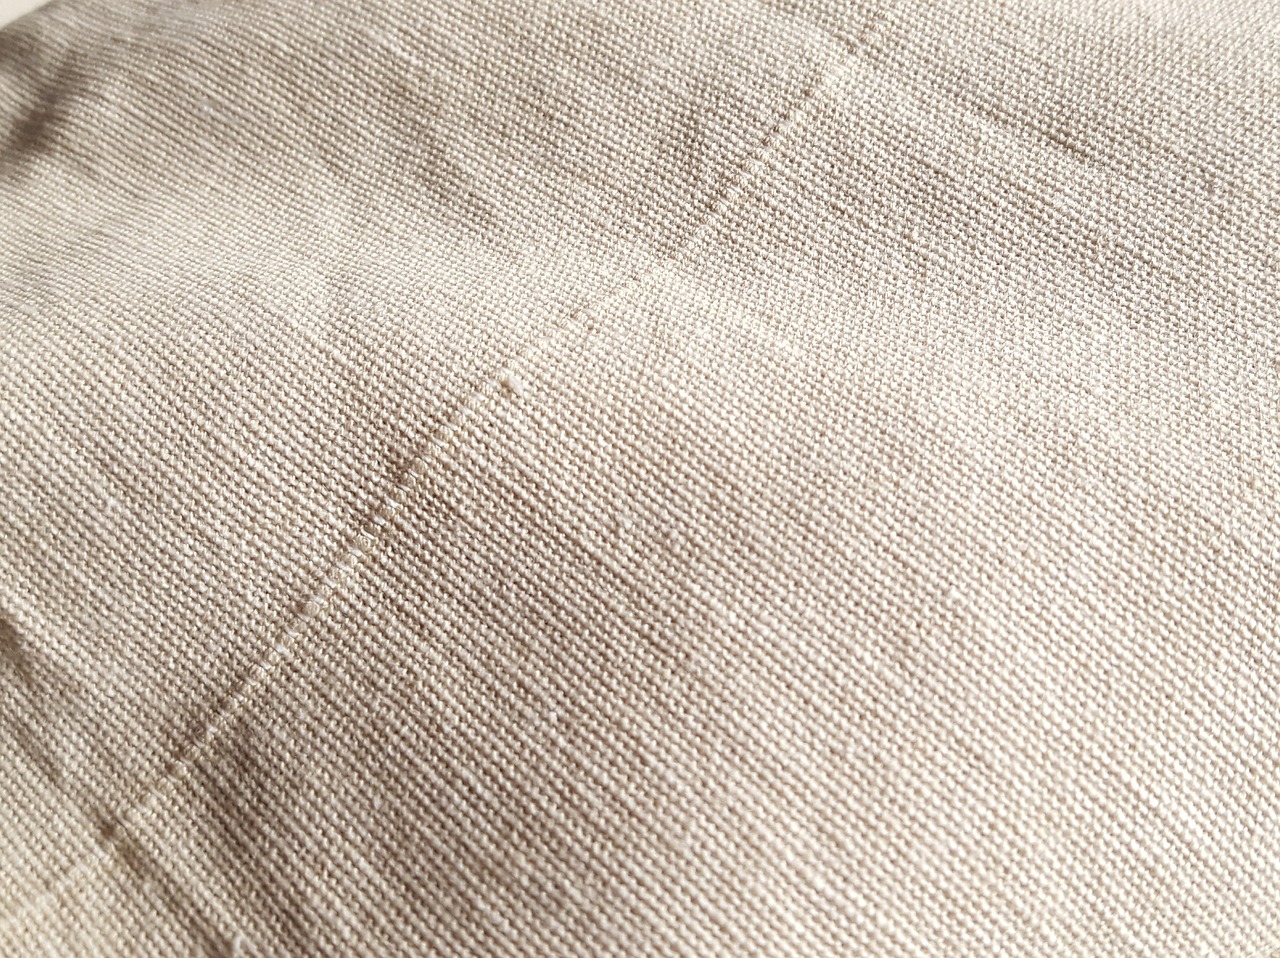 woven fabric texture free photo